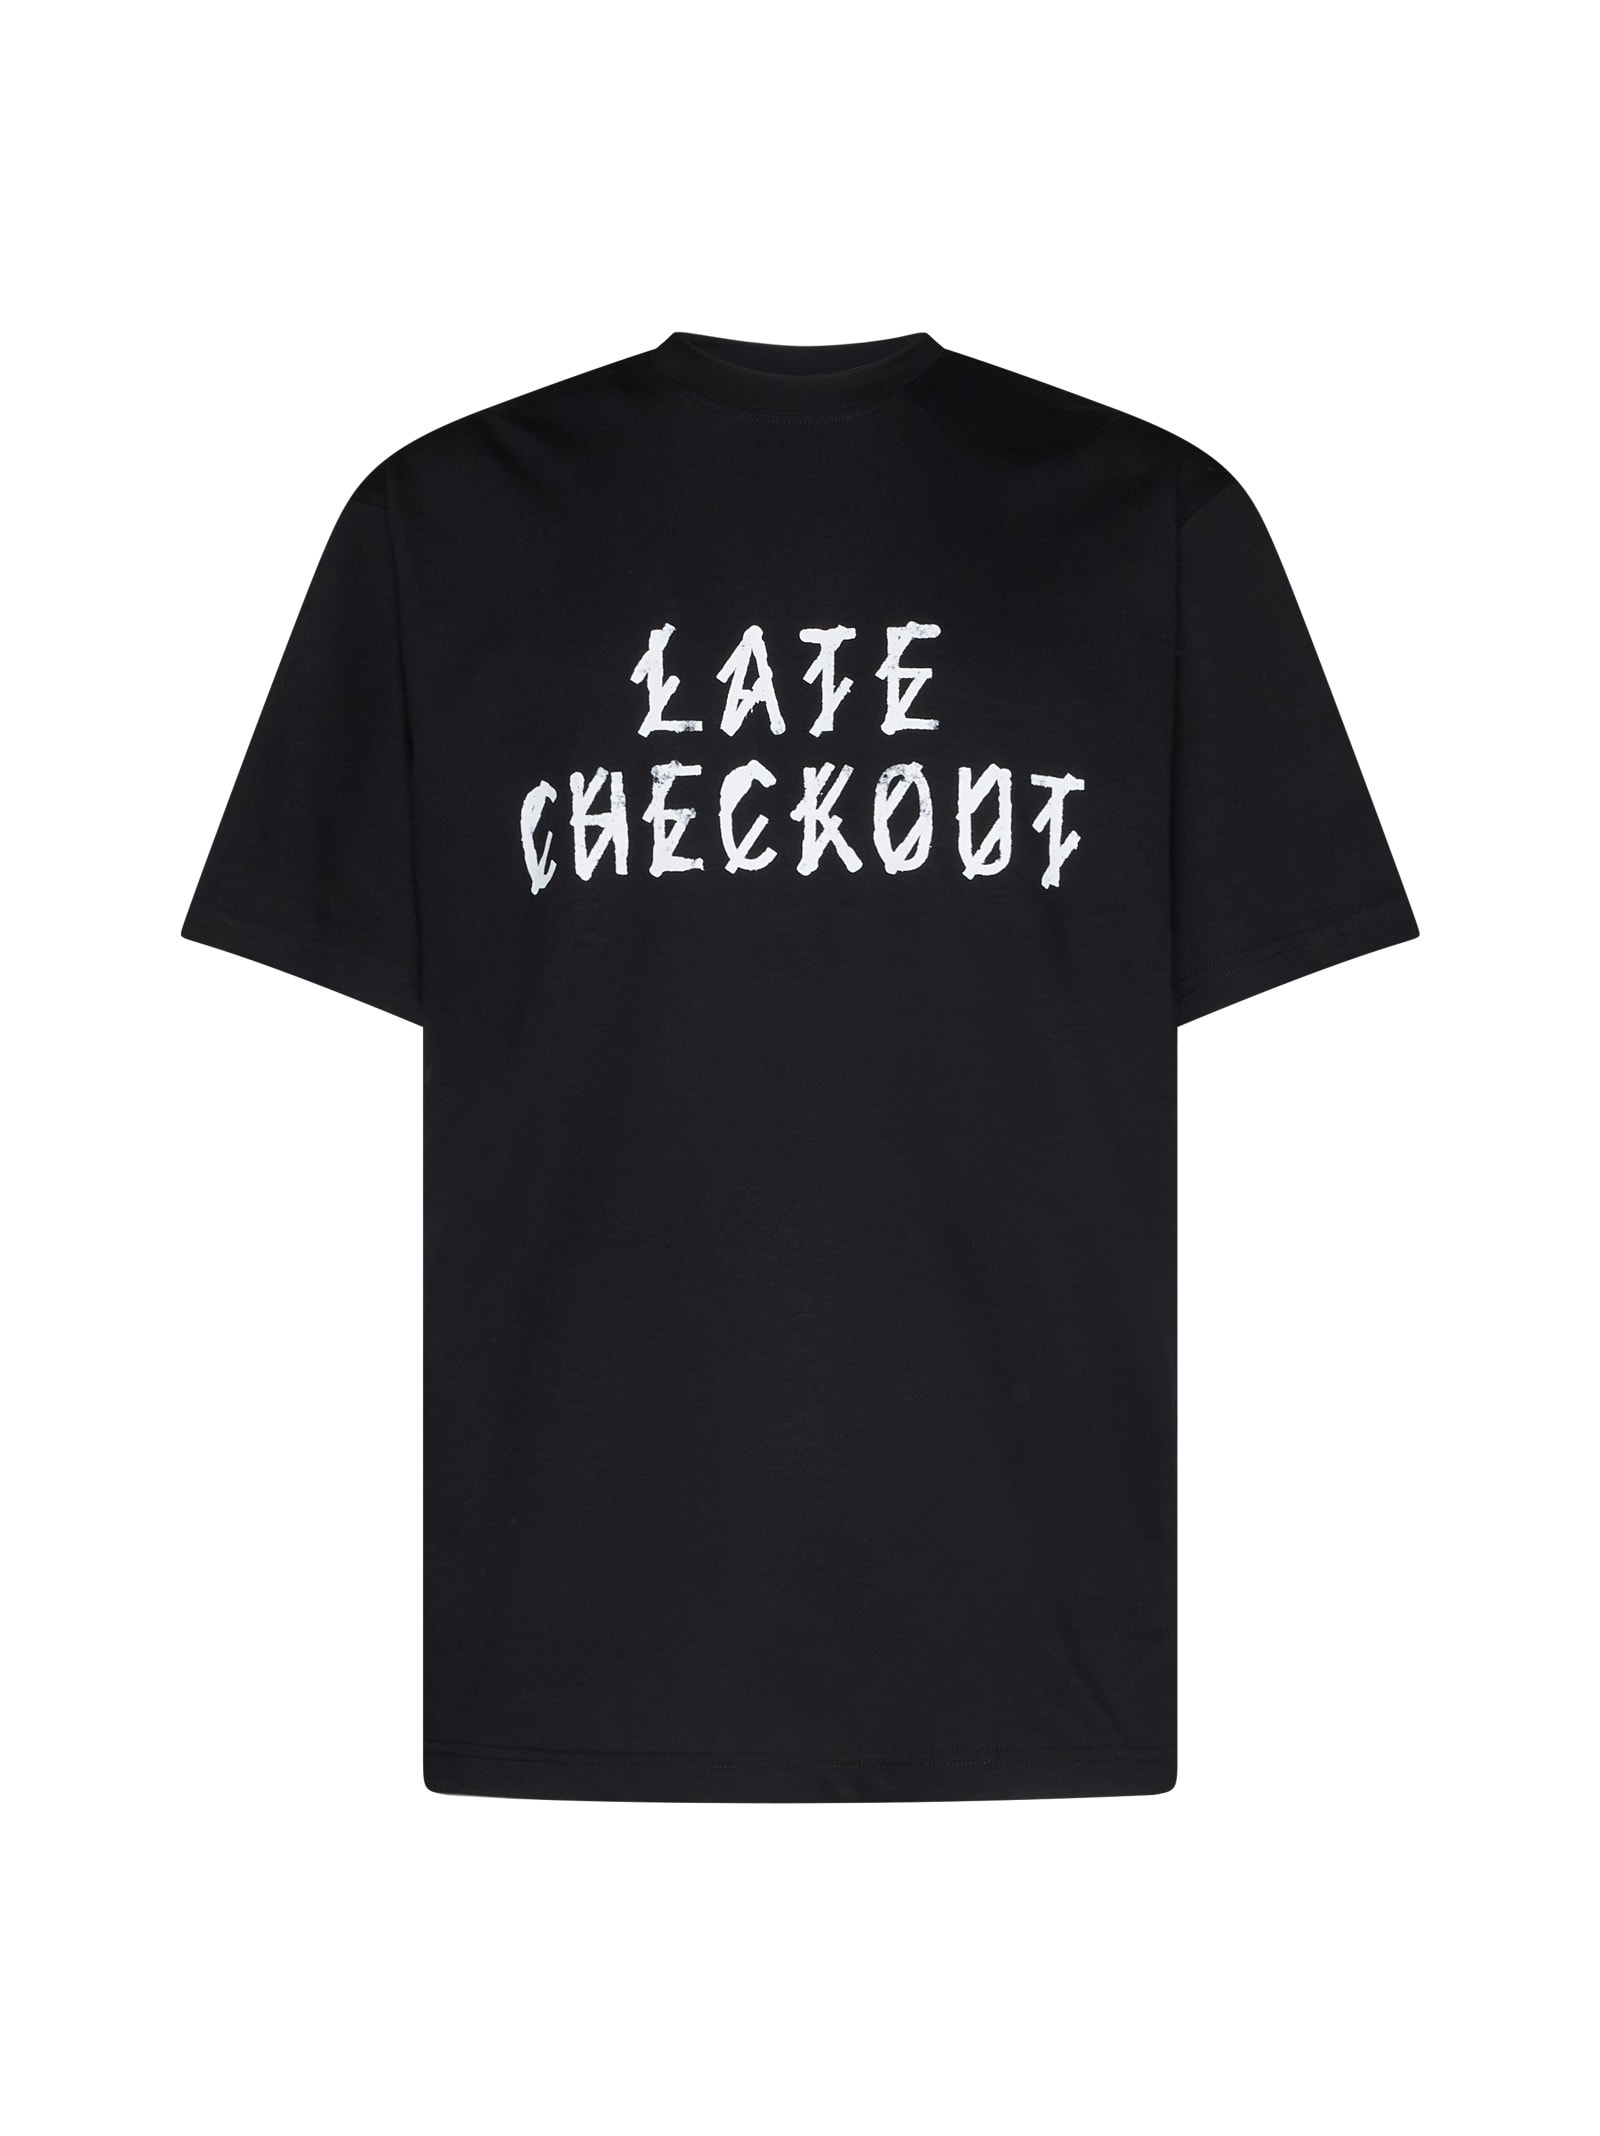 44 Label Group T-shirt In Balck+late Checkout